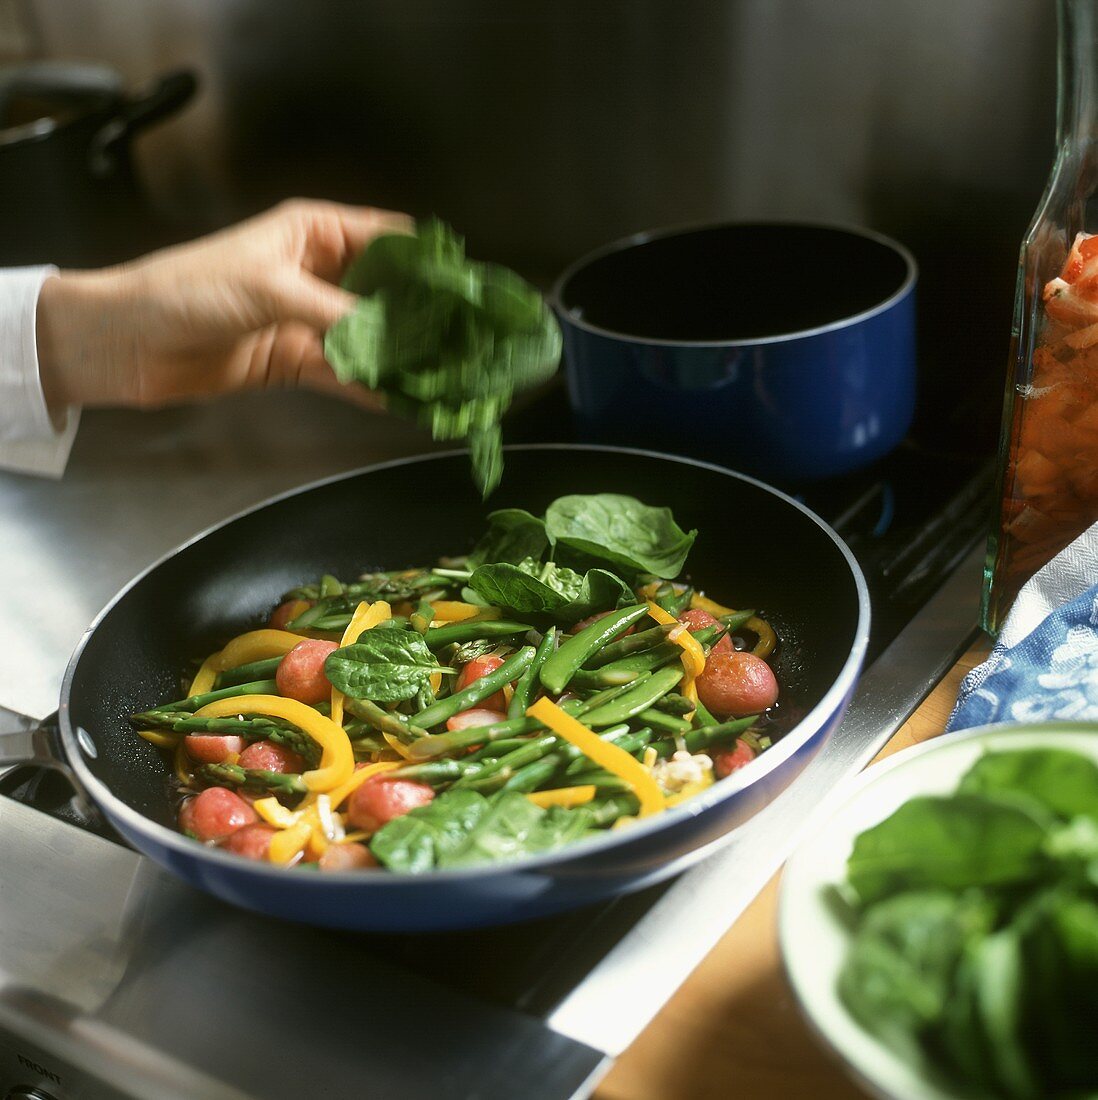 Adding spinach to vegetables in a frying pan